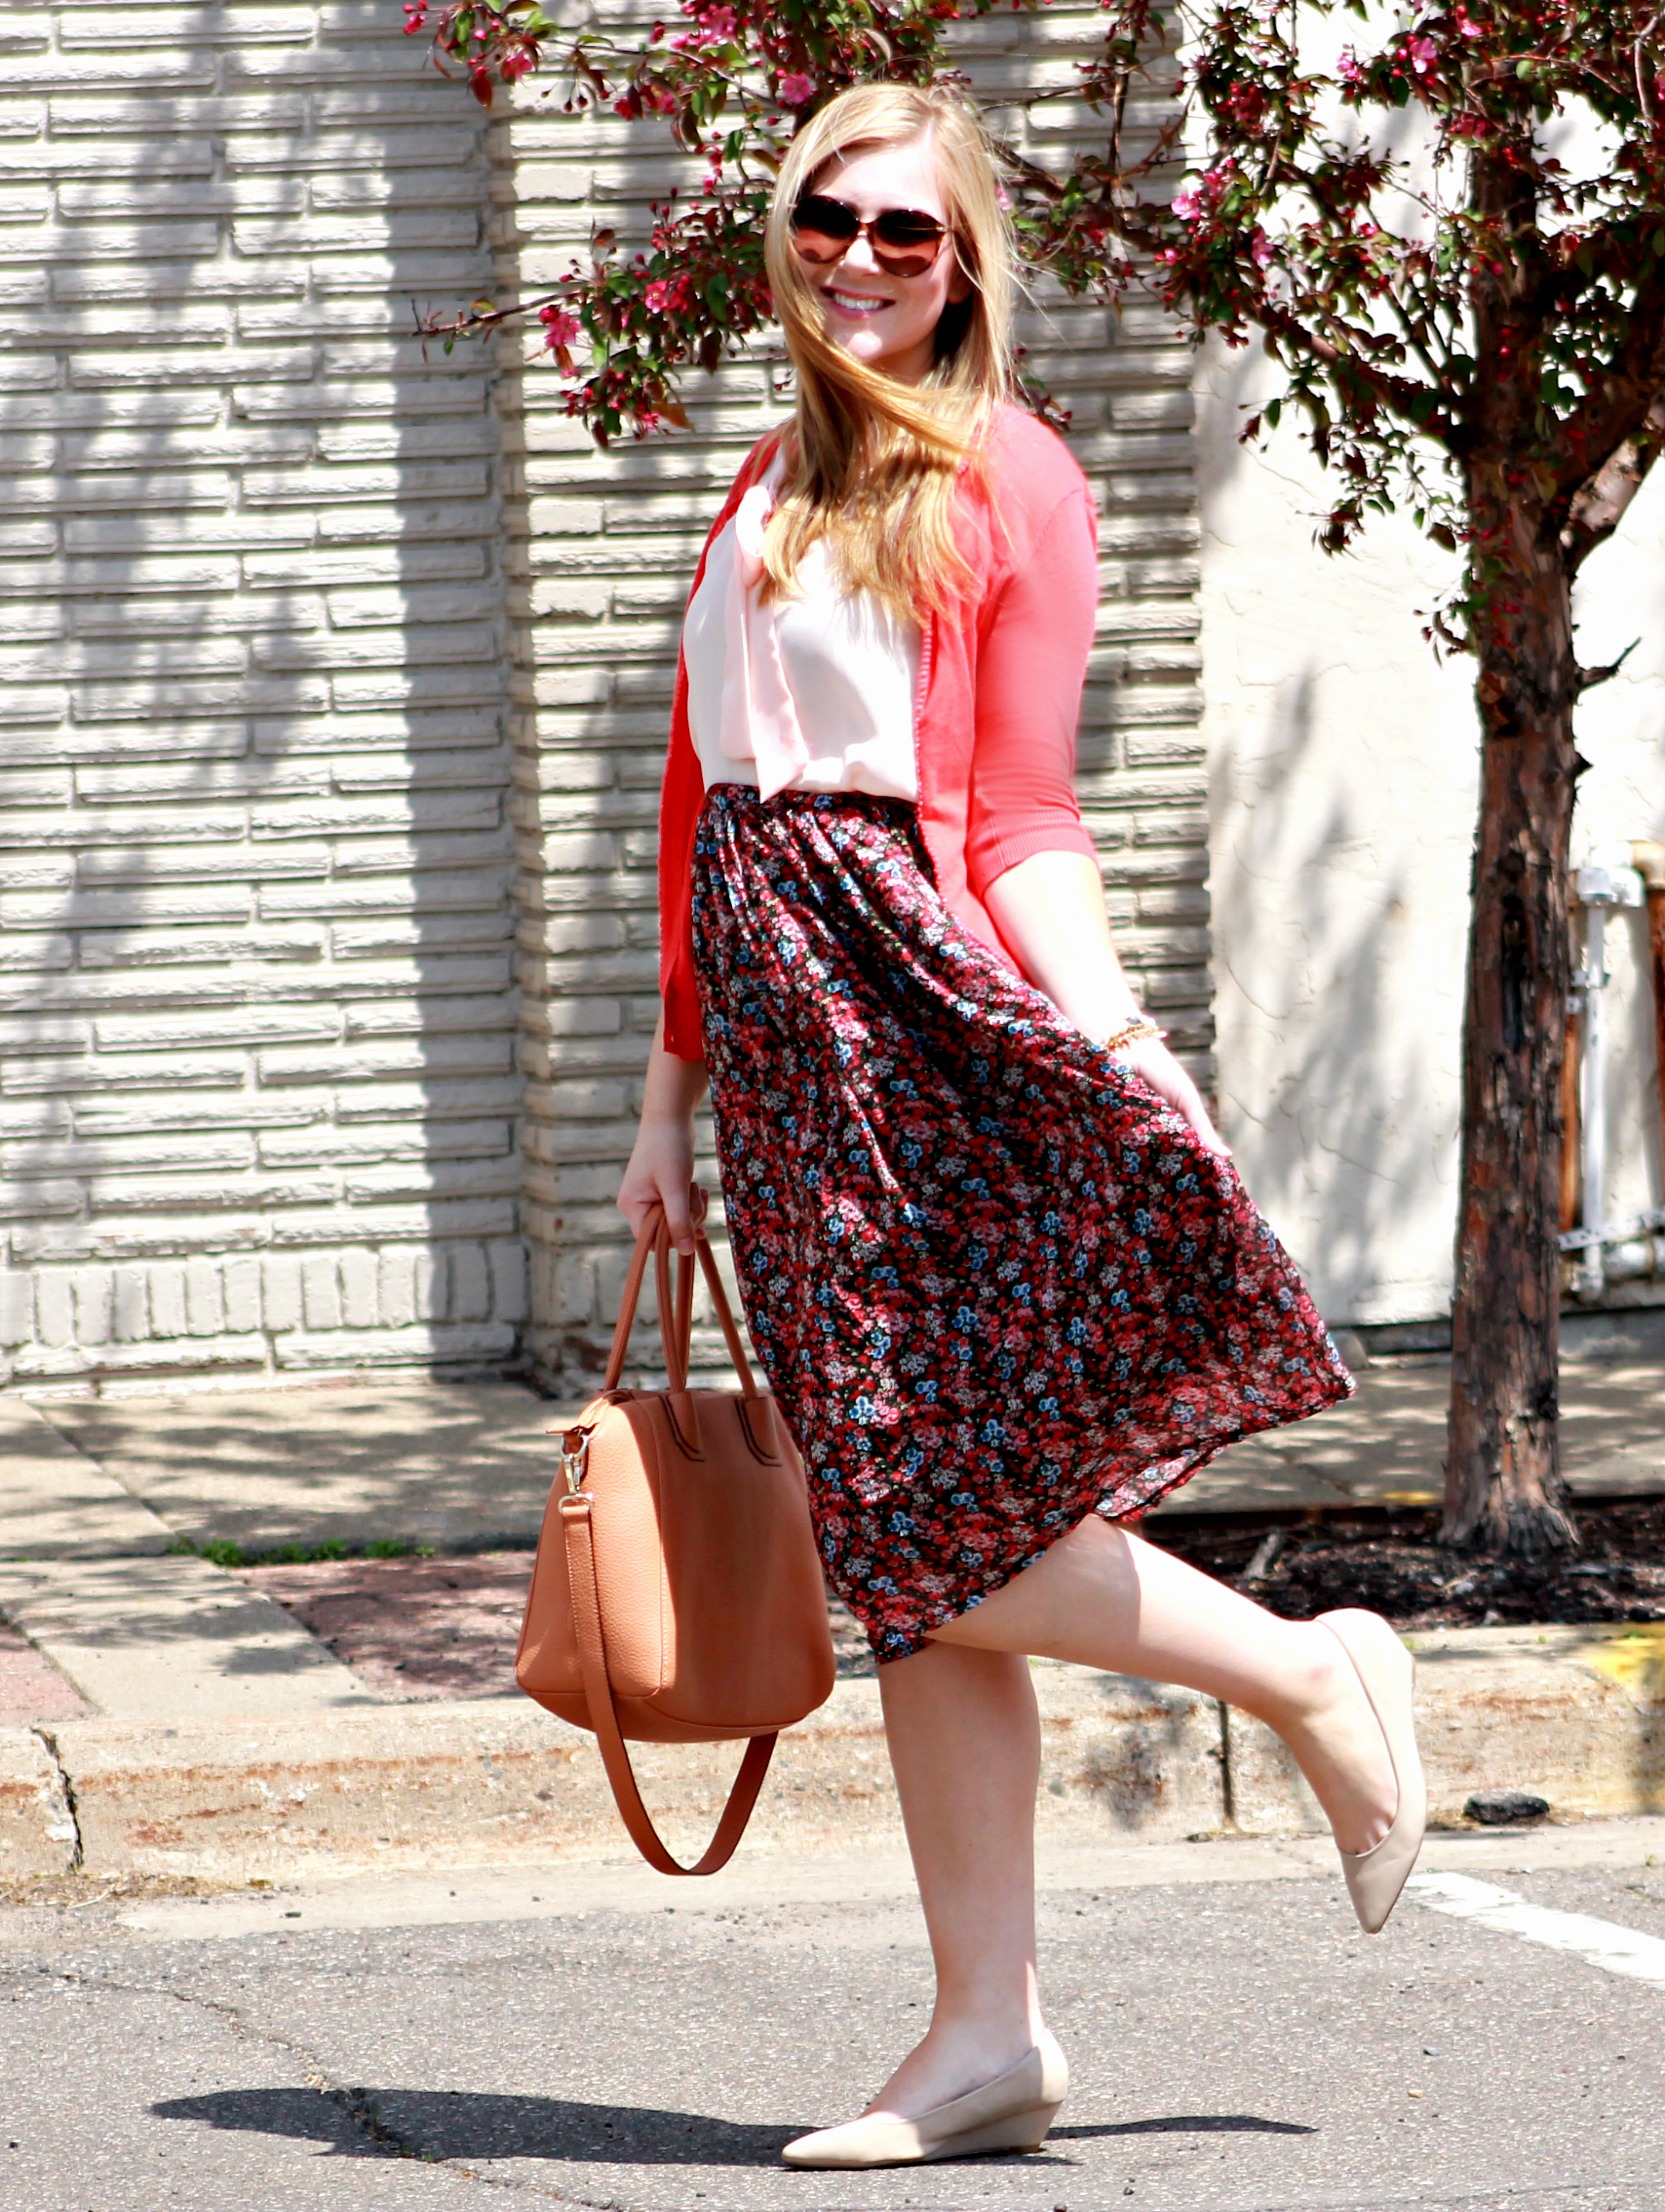 Floral Print Skirt + Bow-Tie Top + Coral Cardigan